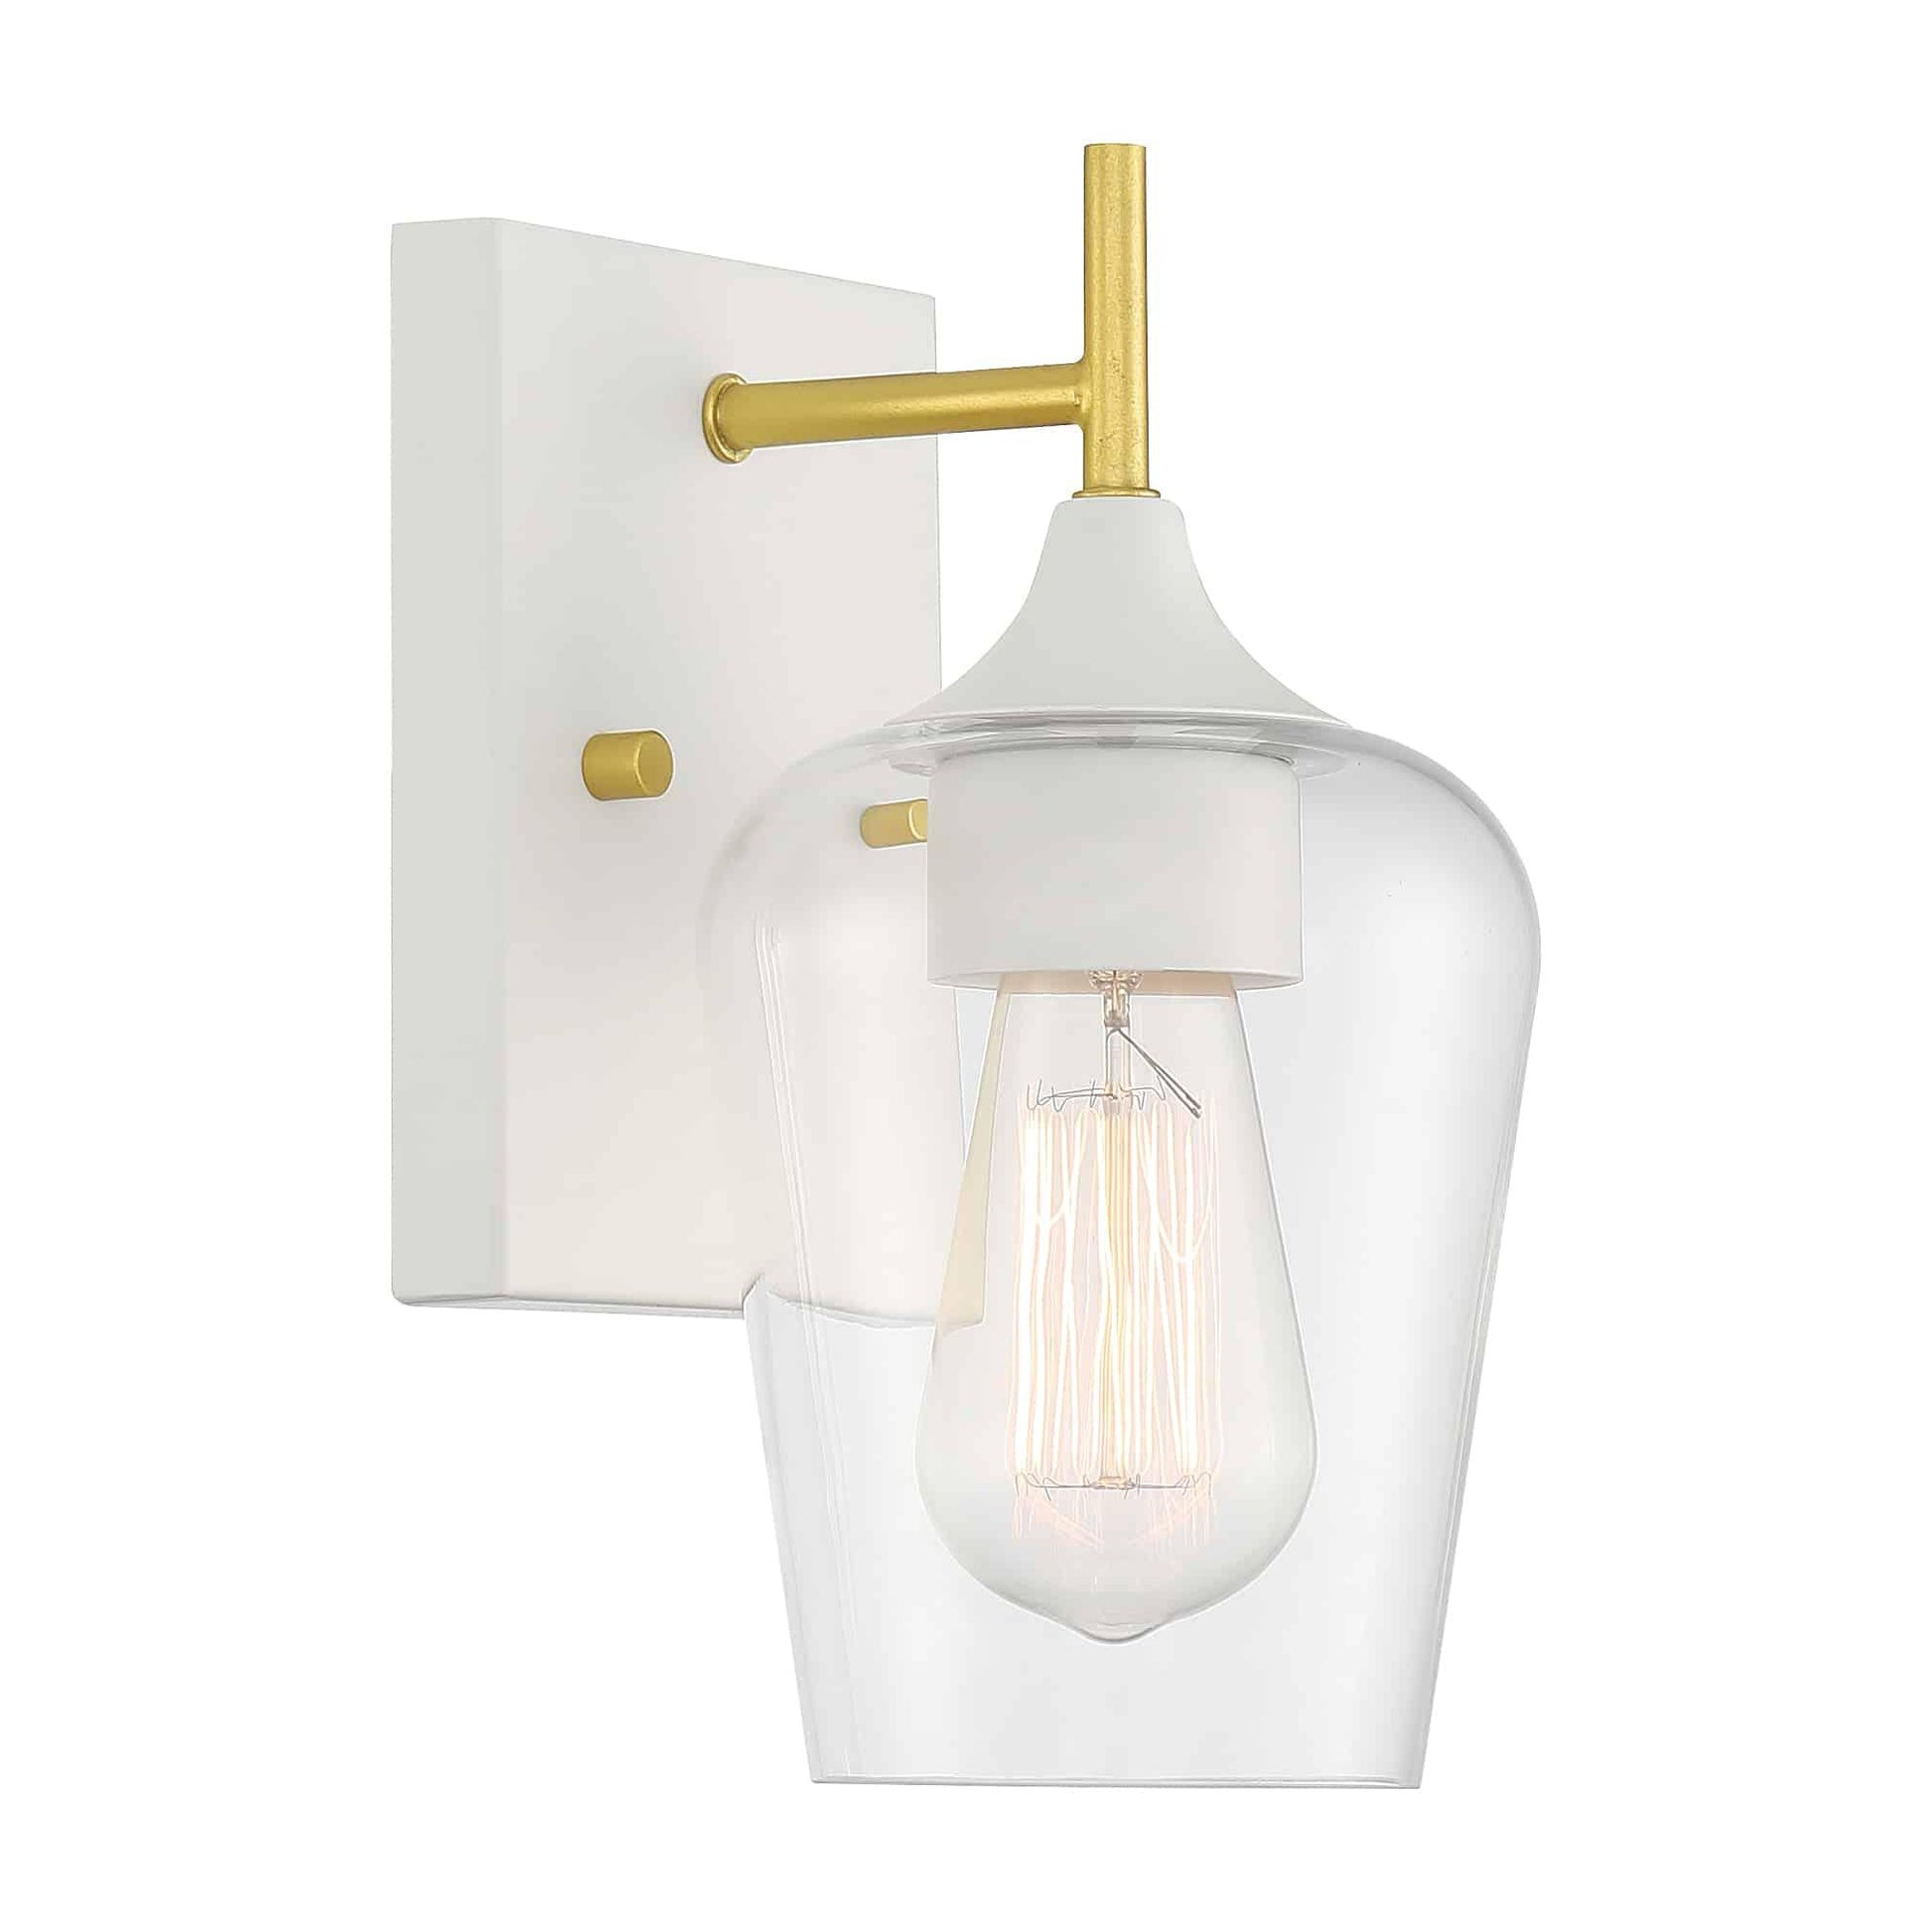 1 light glass wall sconce set of 2 (37) by ACROMA